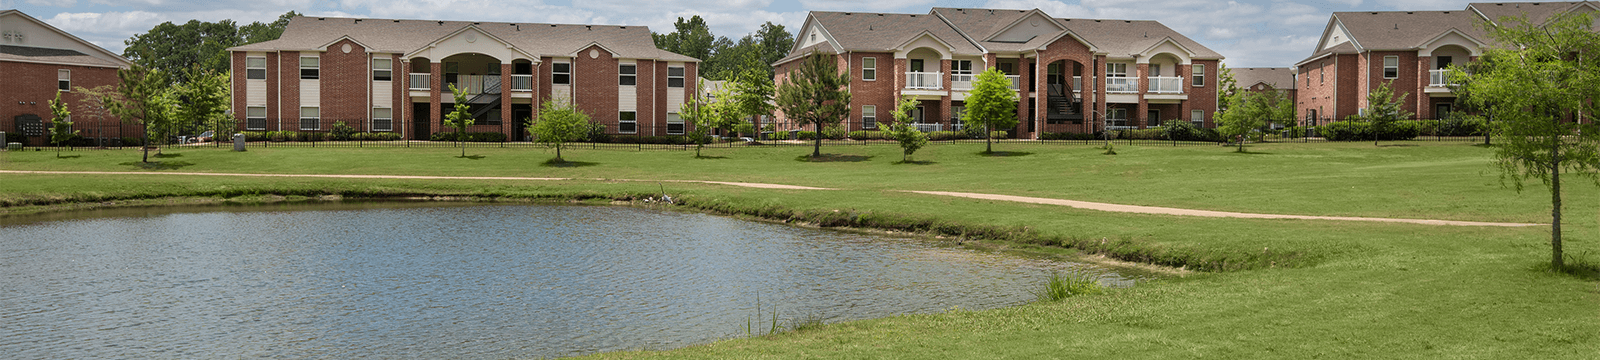 a grassy area with a pond and apartment buildings in the background